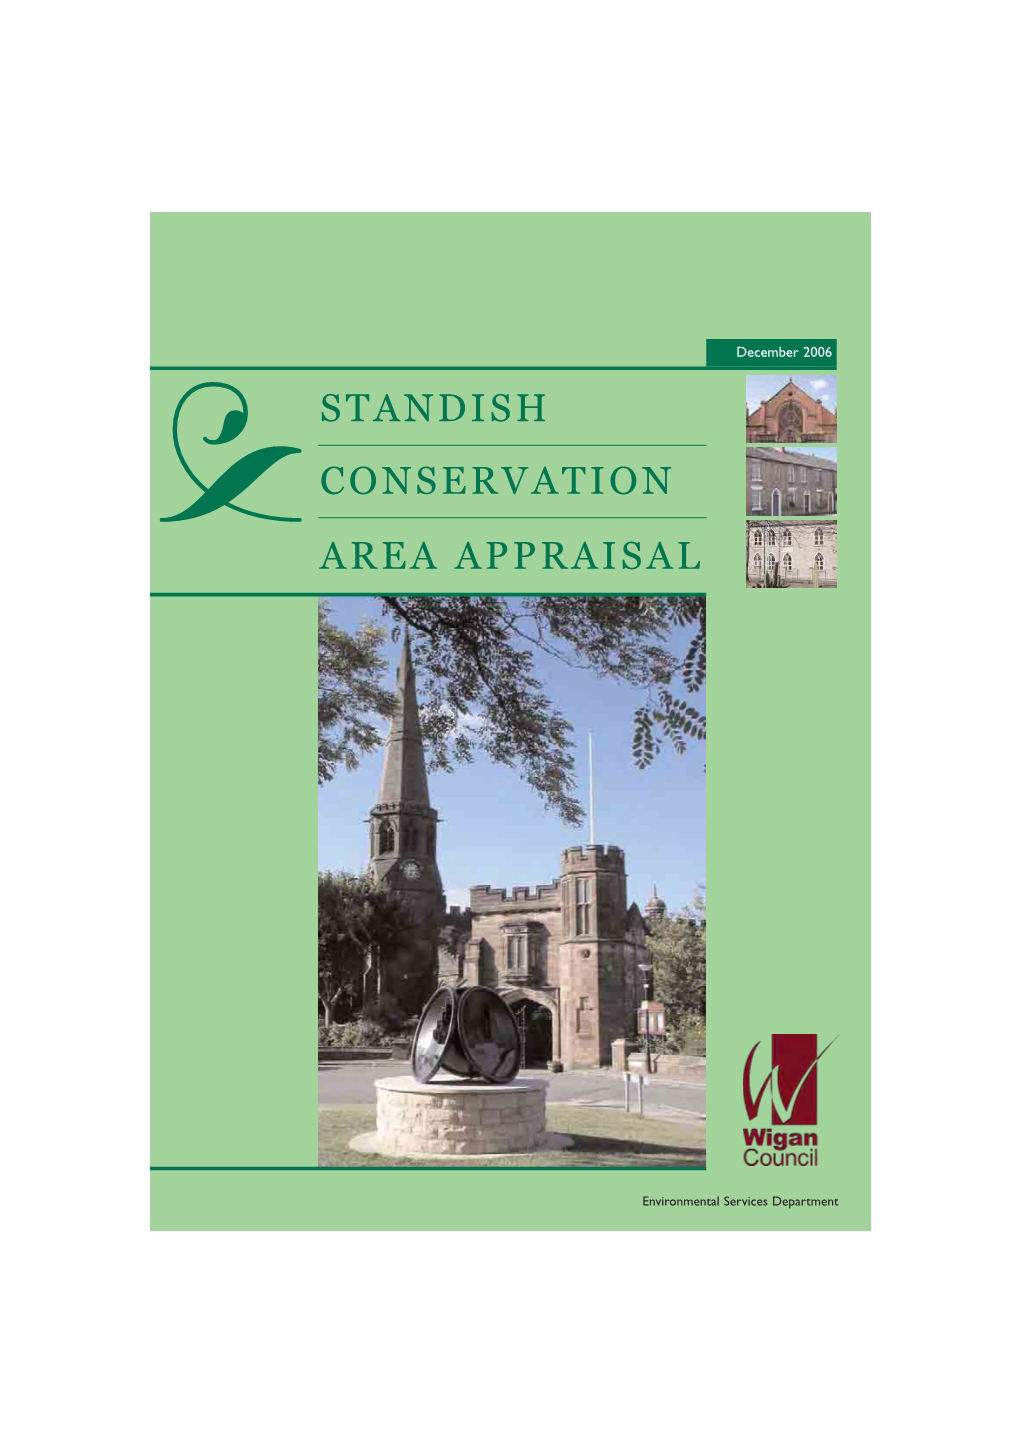 Standish Conservation Area Appraisal